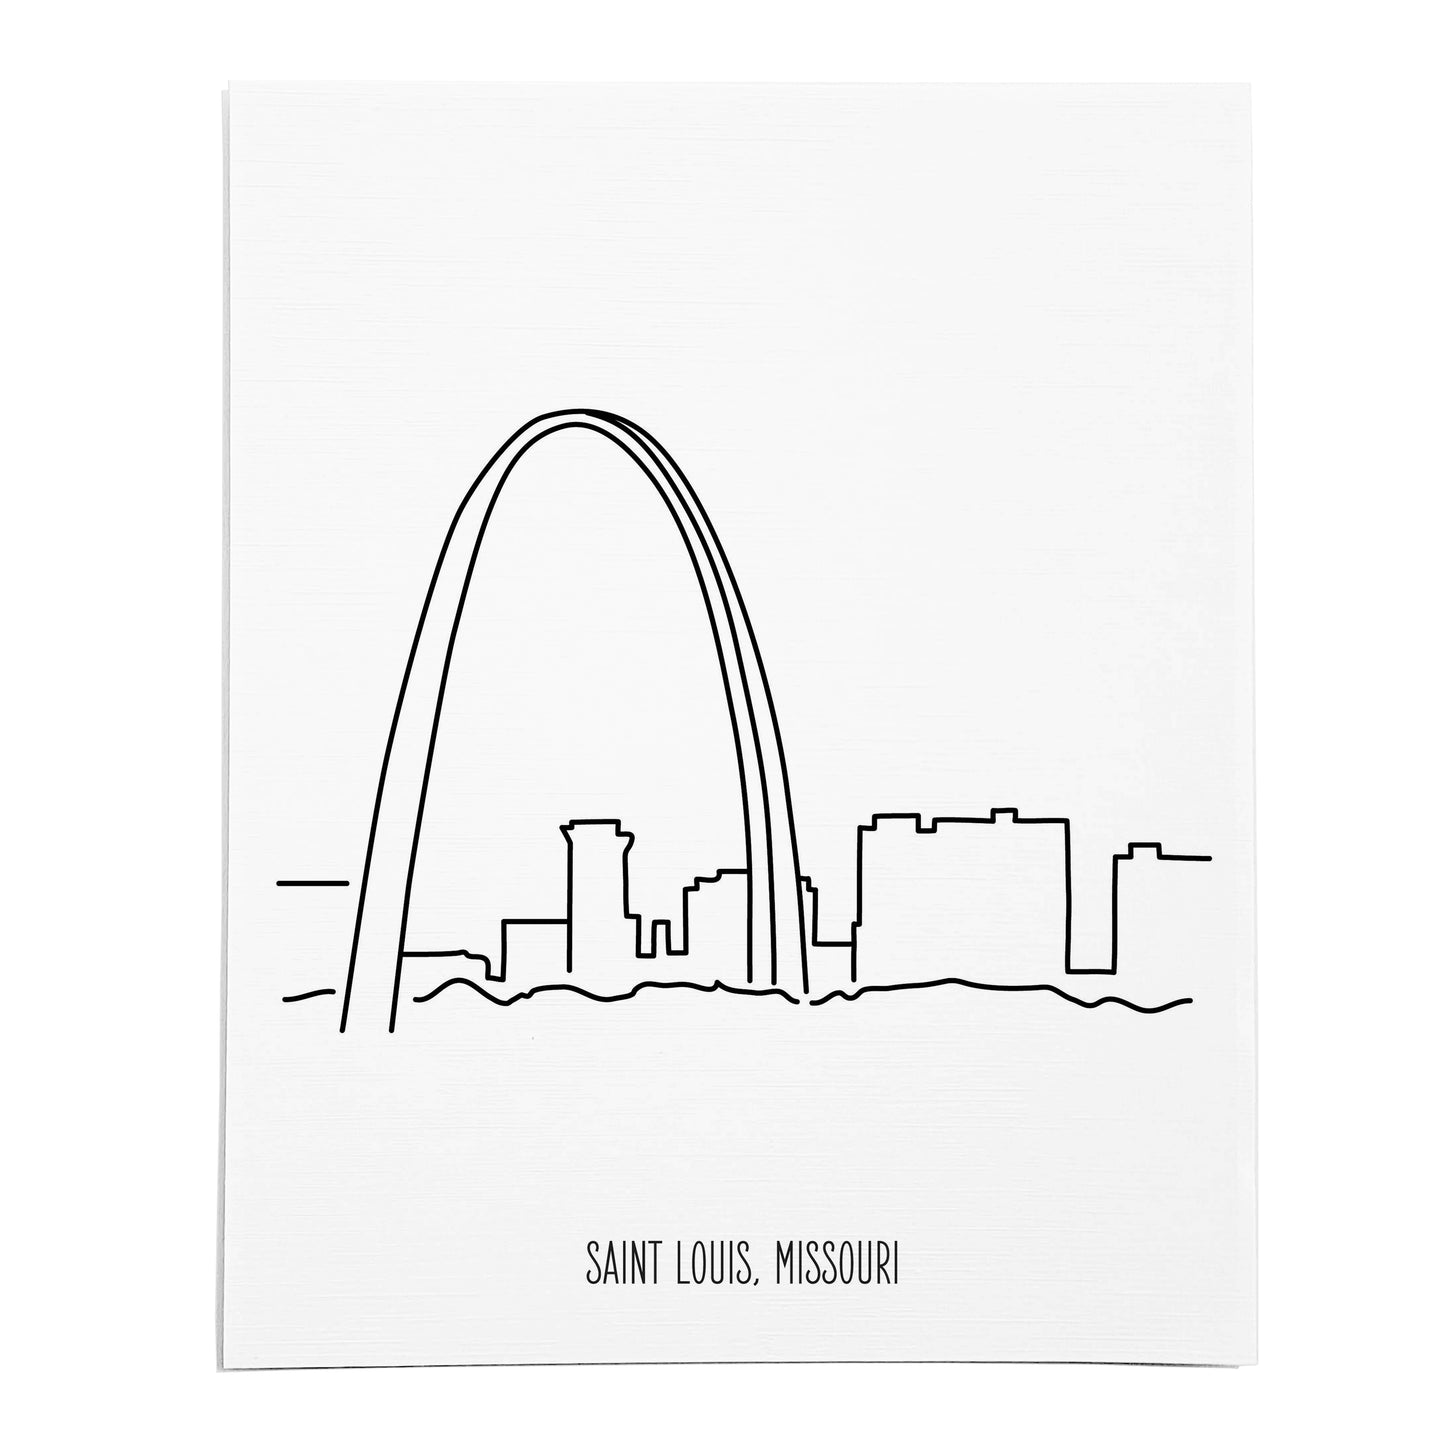 An art print featuring a line drawing of the Saint Louis Skyline on white linen paper